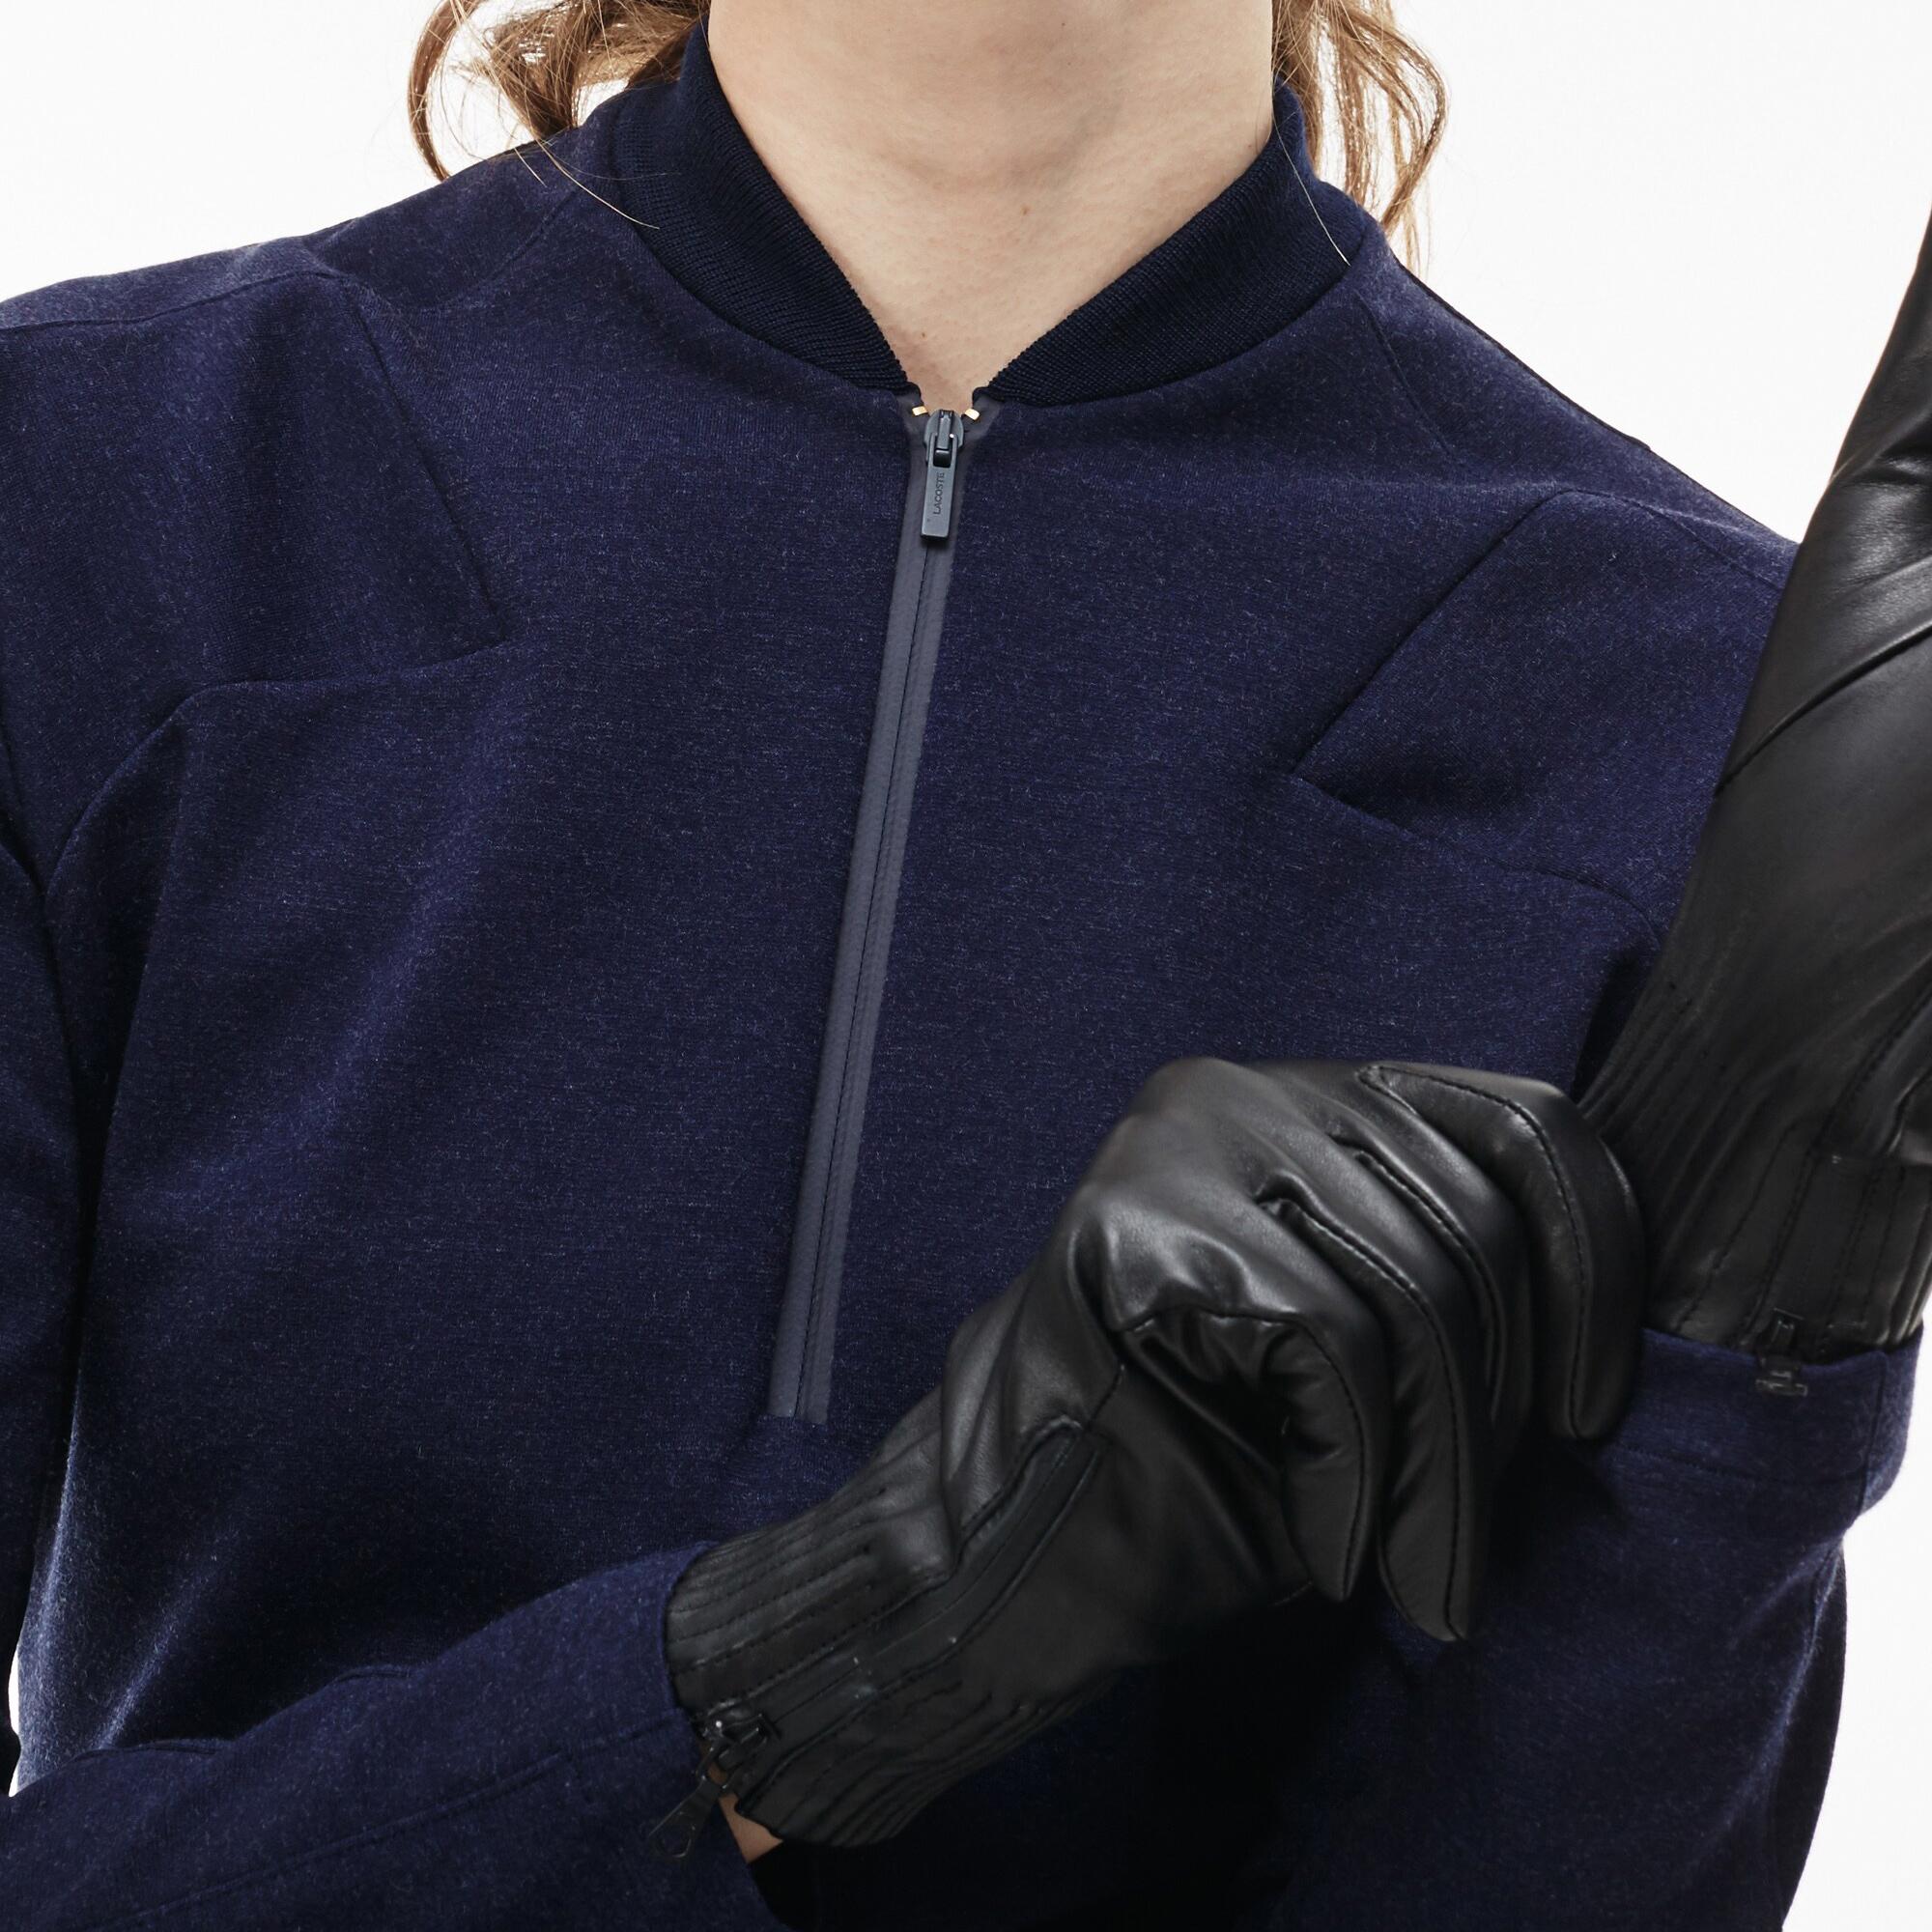 lacoste leather gloves